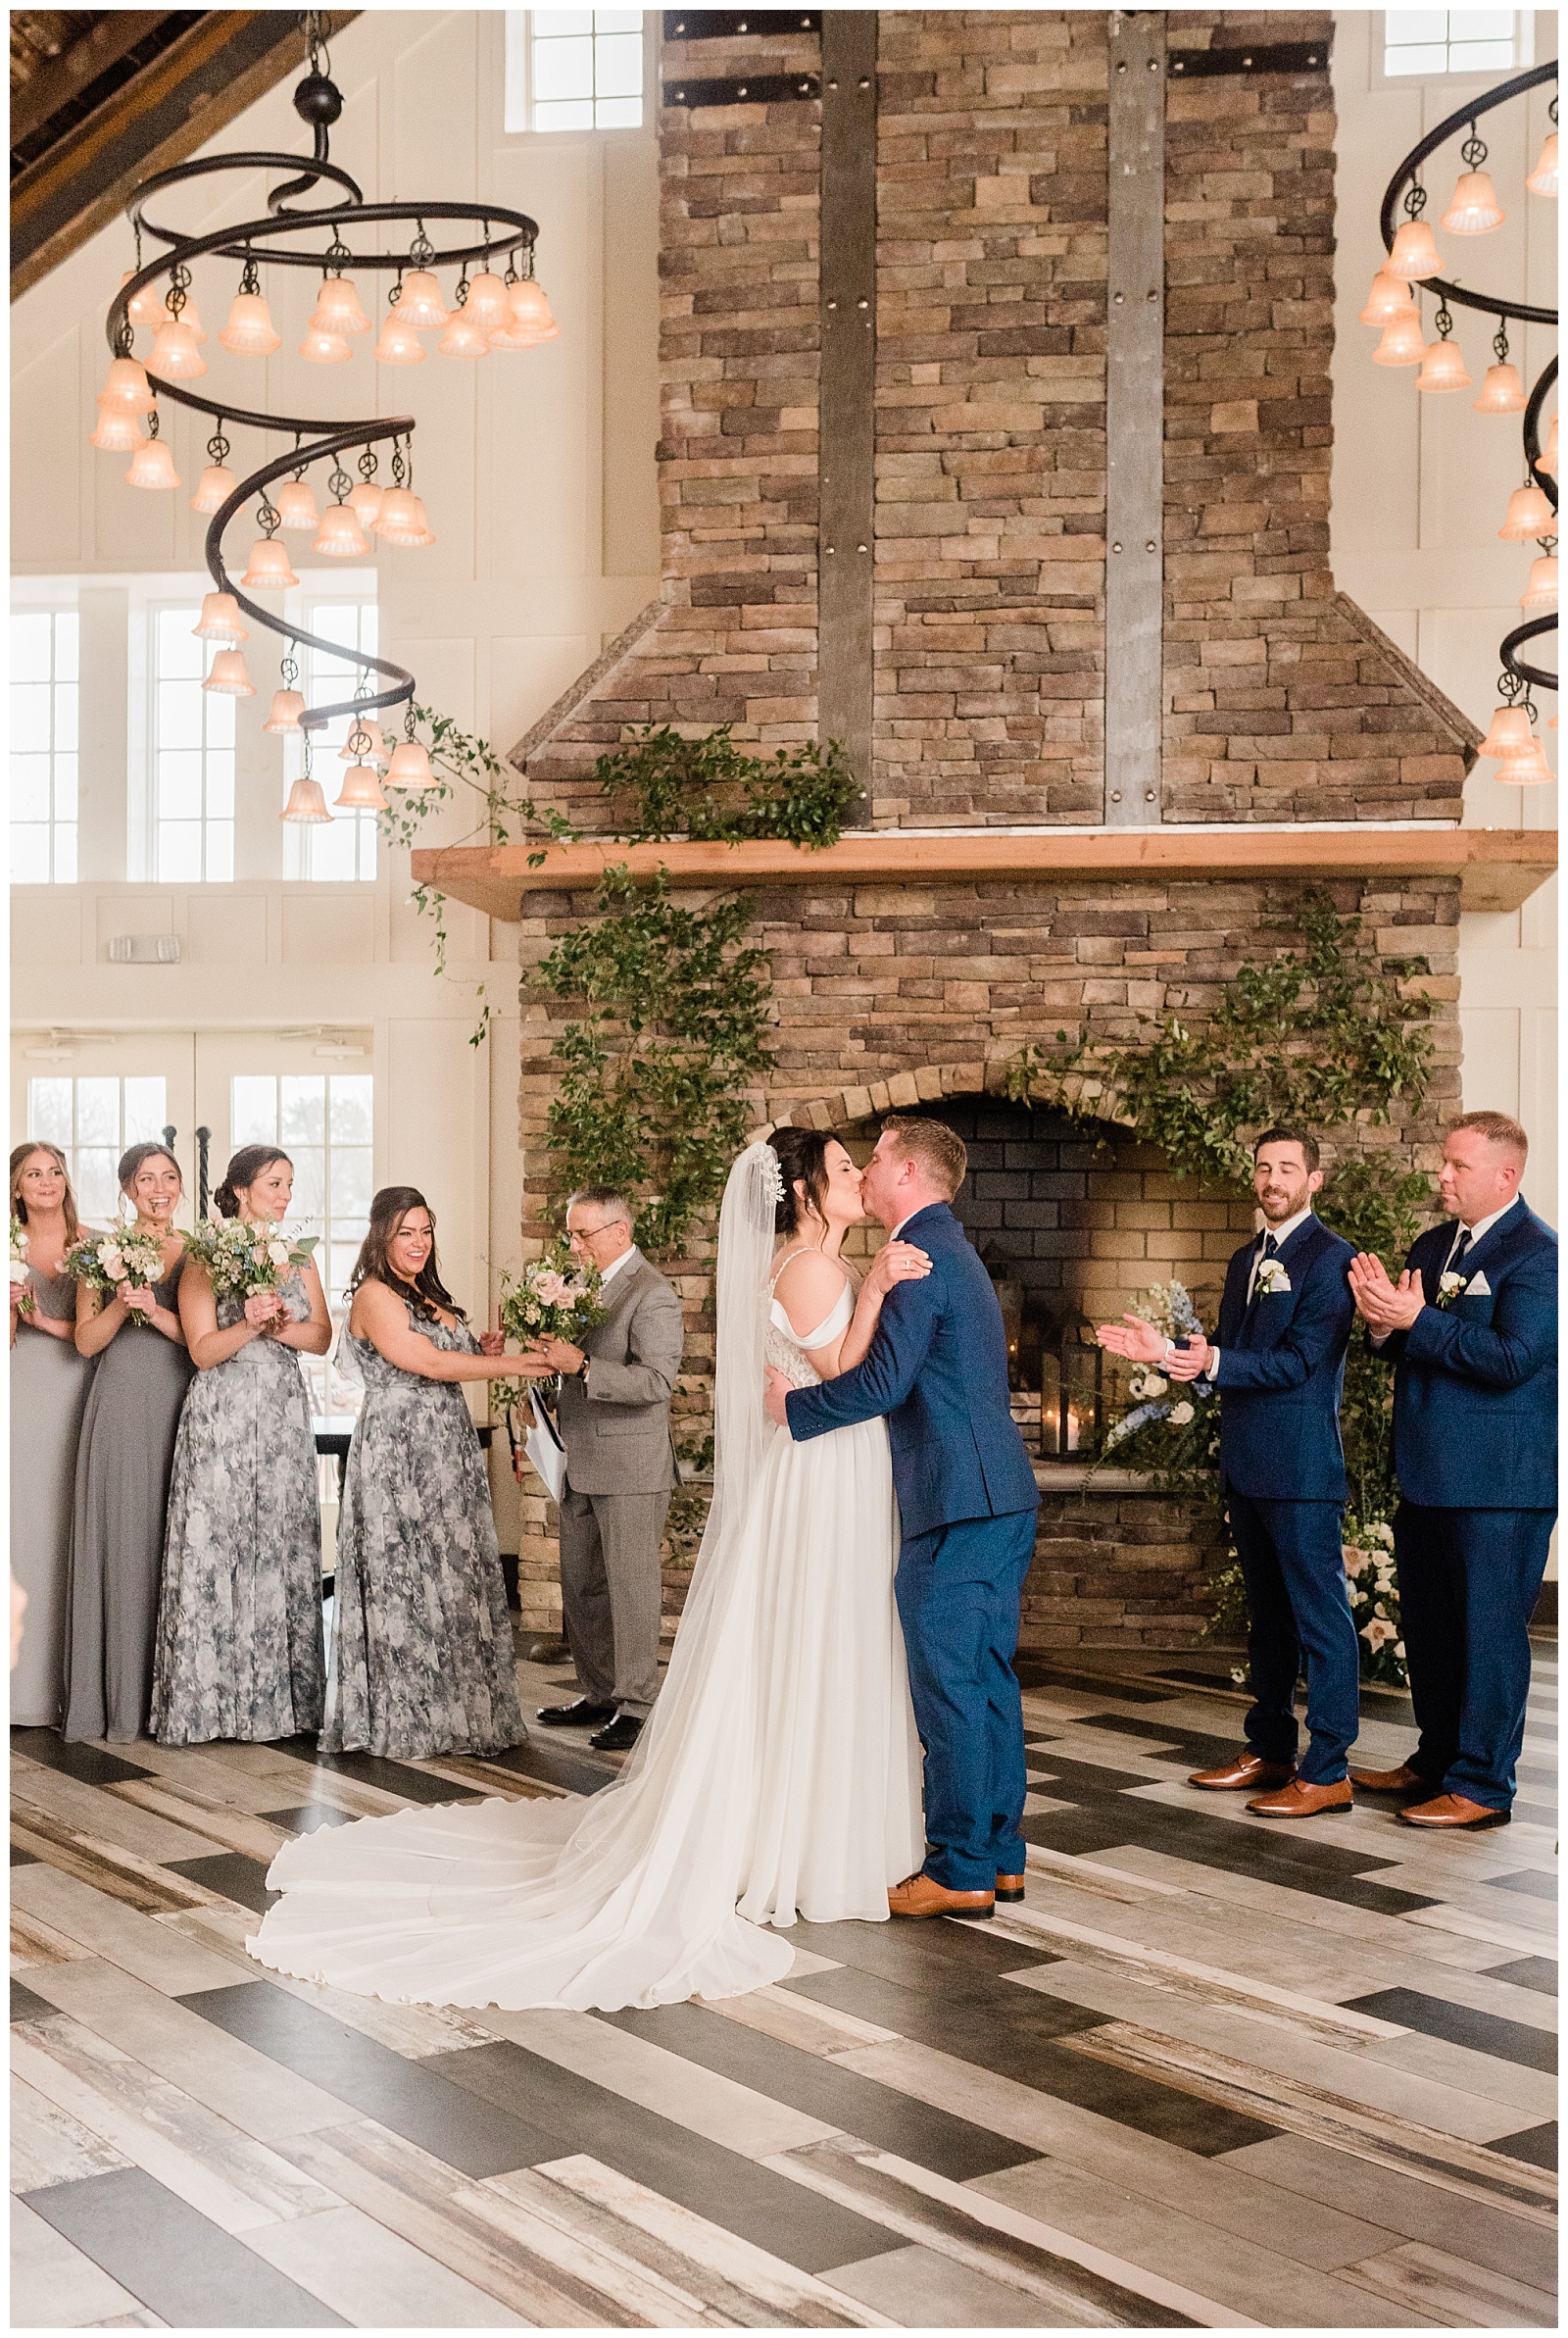 Bride and groom share their first kiss after their wedding ceremony in the Coach House at the Ryland Inn.